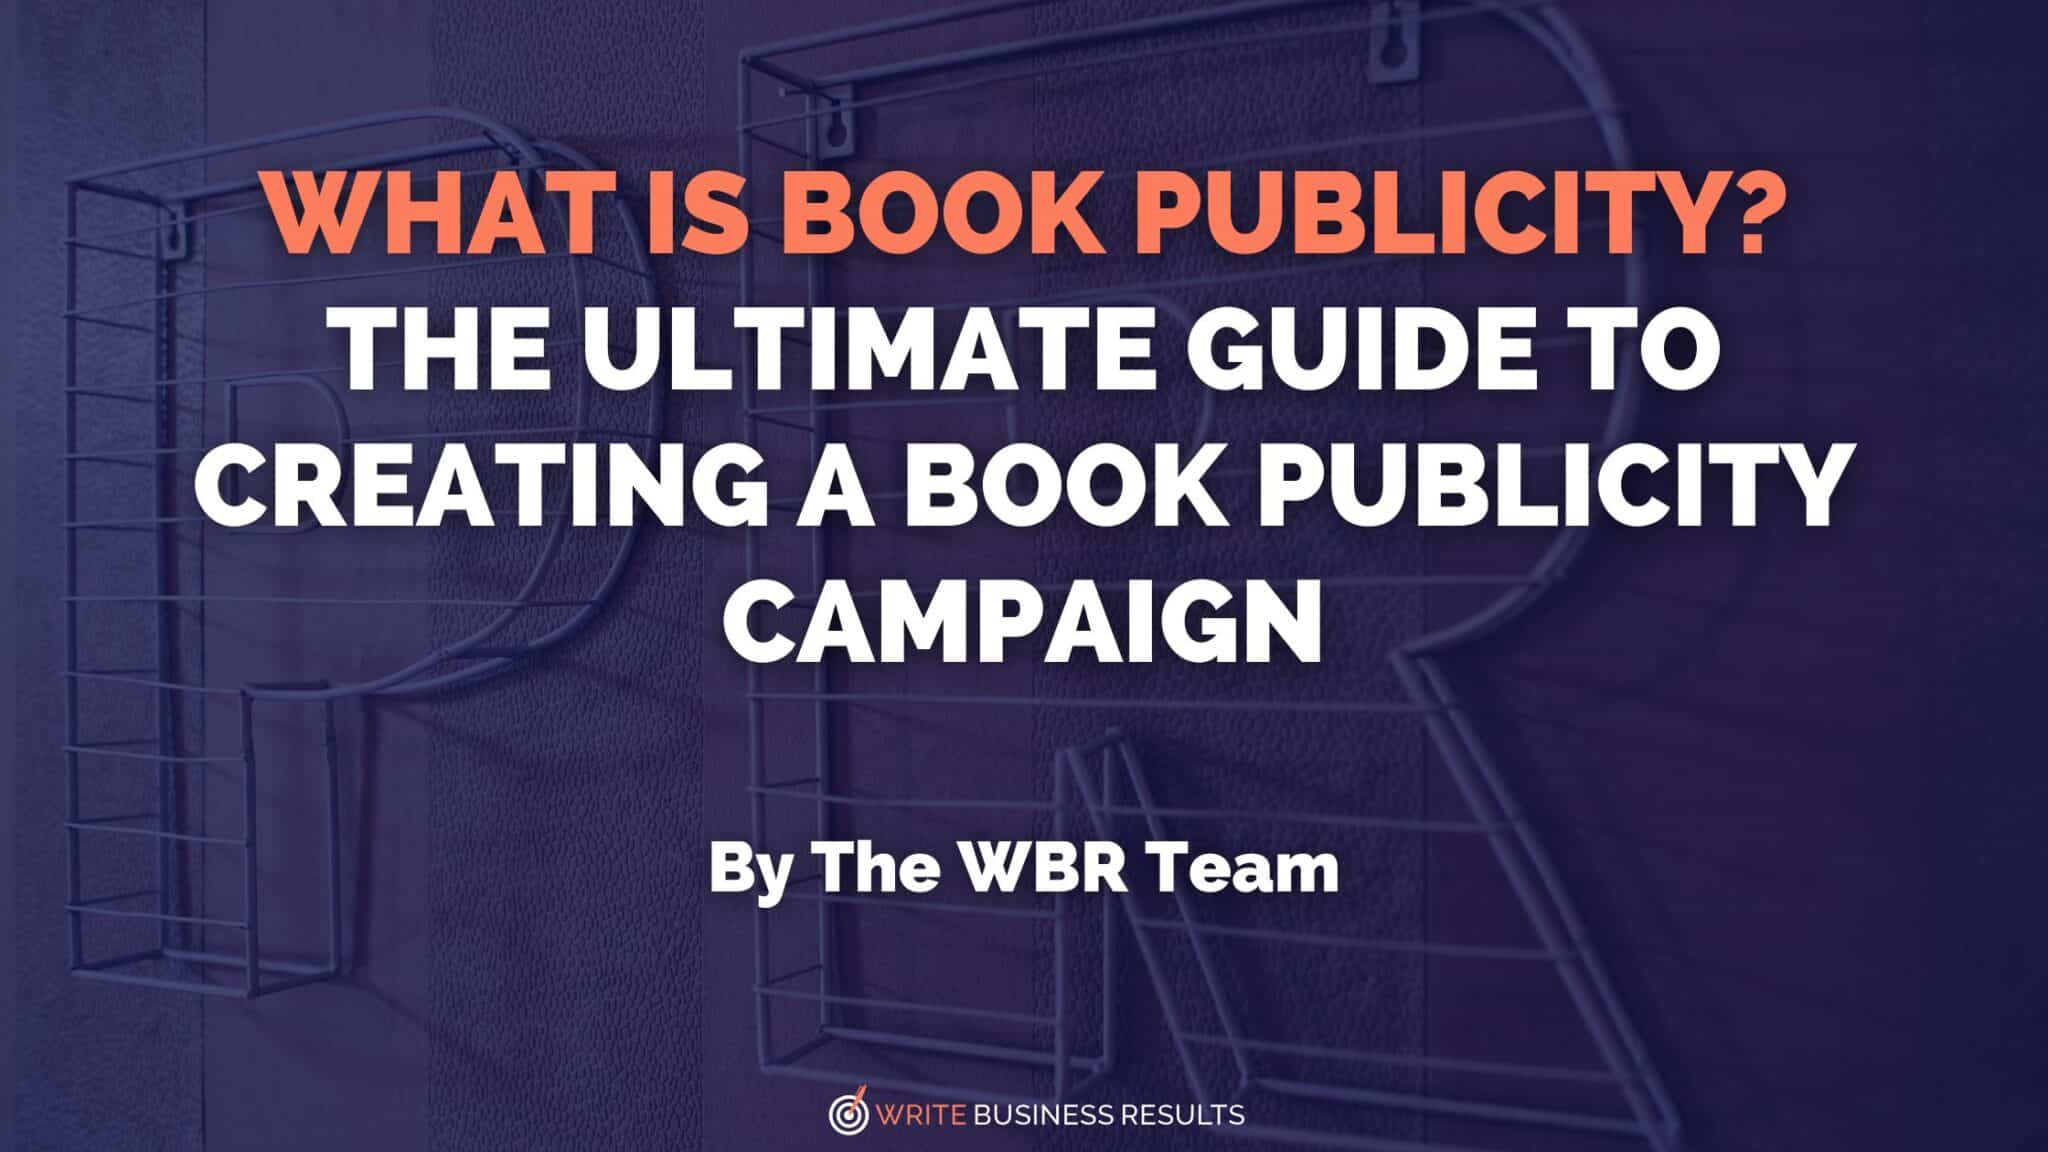 What Is Book Publicity? The Ultimate Guide To Creating A Book Publicity Campaign